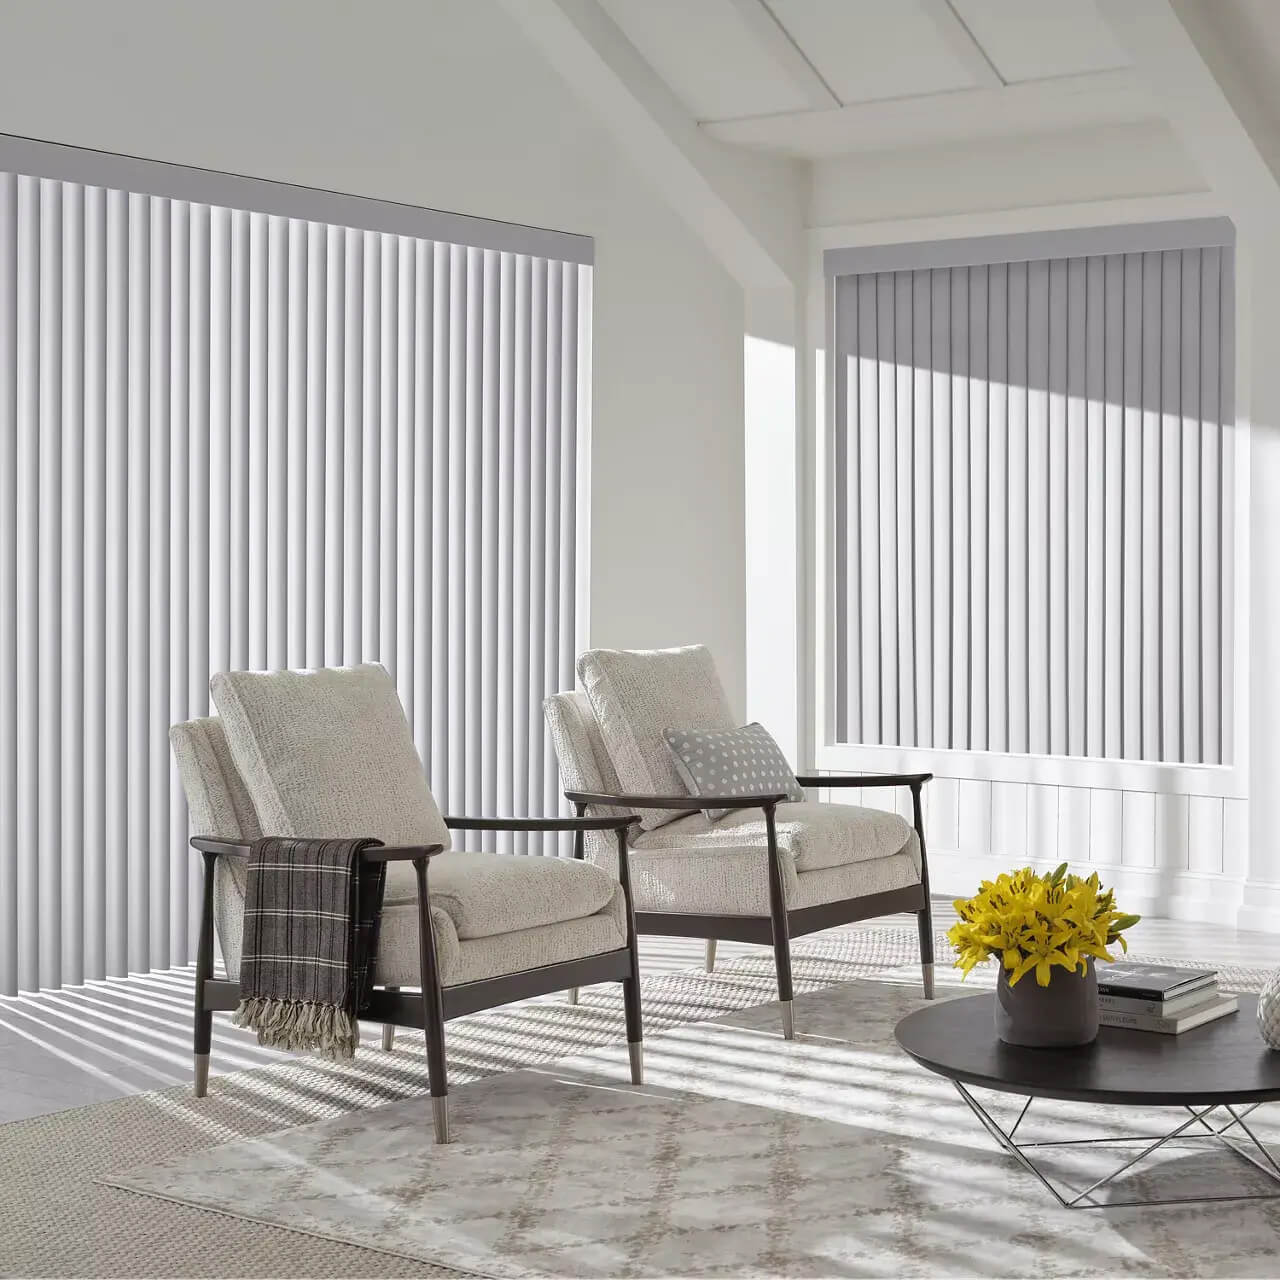 Window Treatments | Carreras Flooring and Blinds